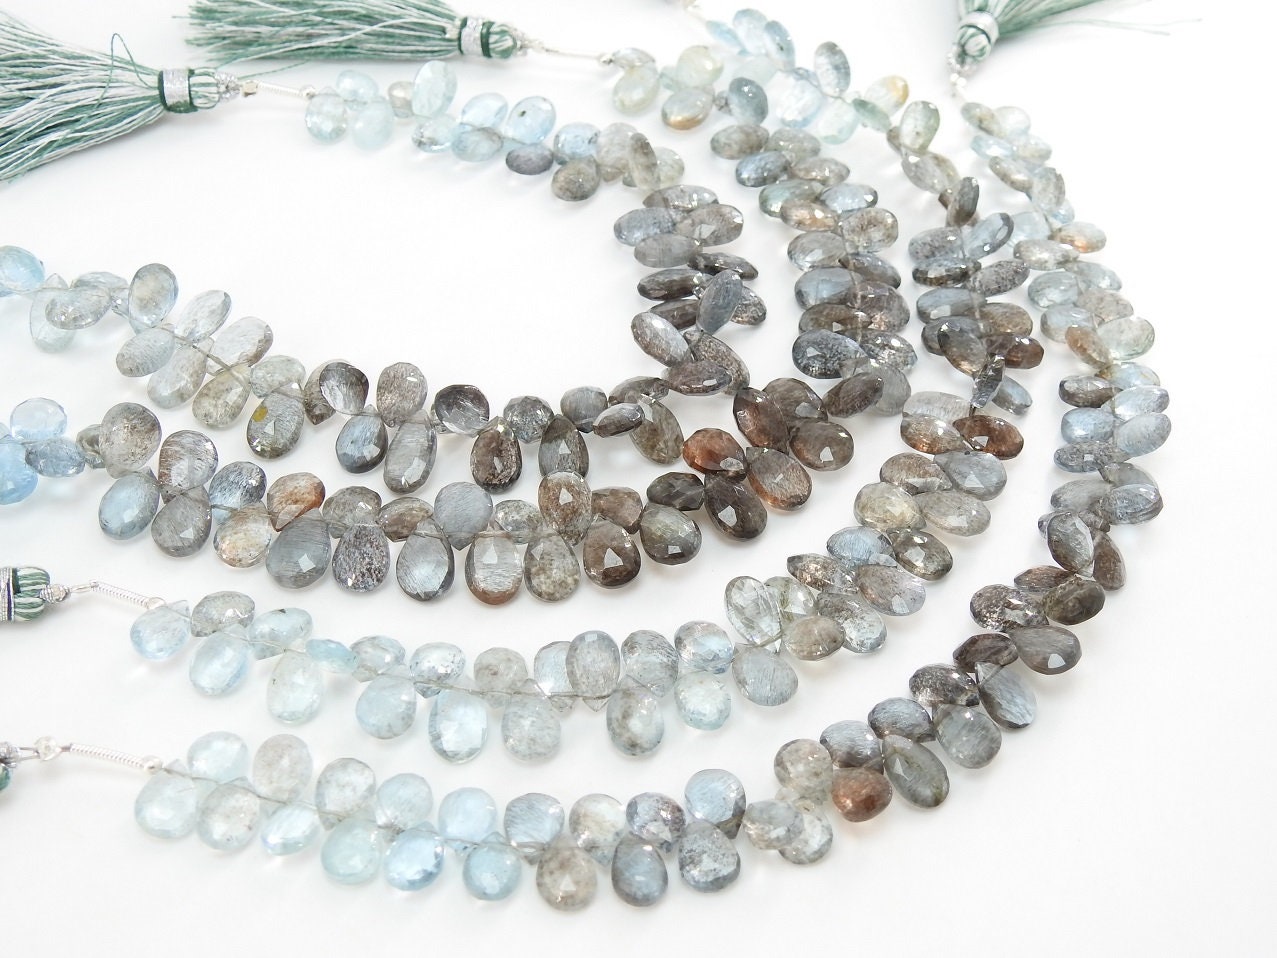 Moss Aquamarine Faceted Teardrop,Multi Shaded,Loose Bead 8Inch 9X6To8X5MM Approx Wholesale Price,New Arrival,100%Natural BB(BR4) | Save 33% - Rajasthan Living 16